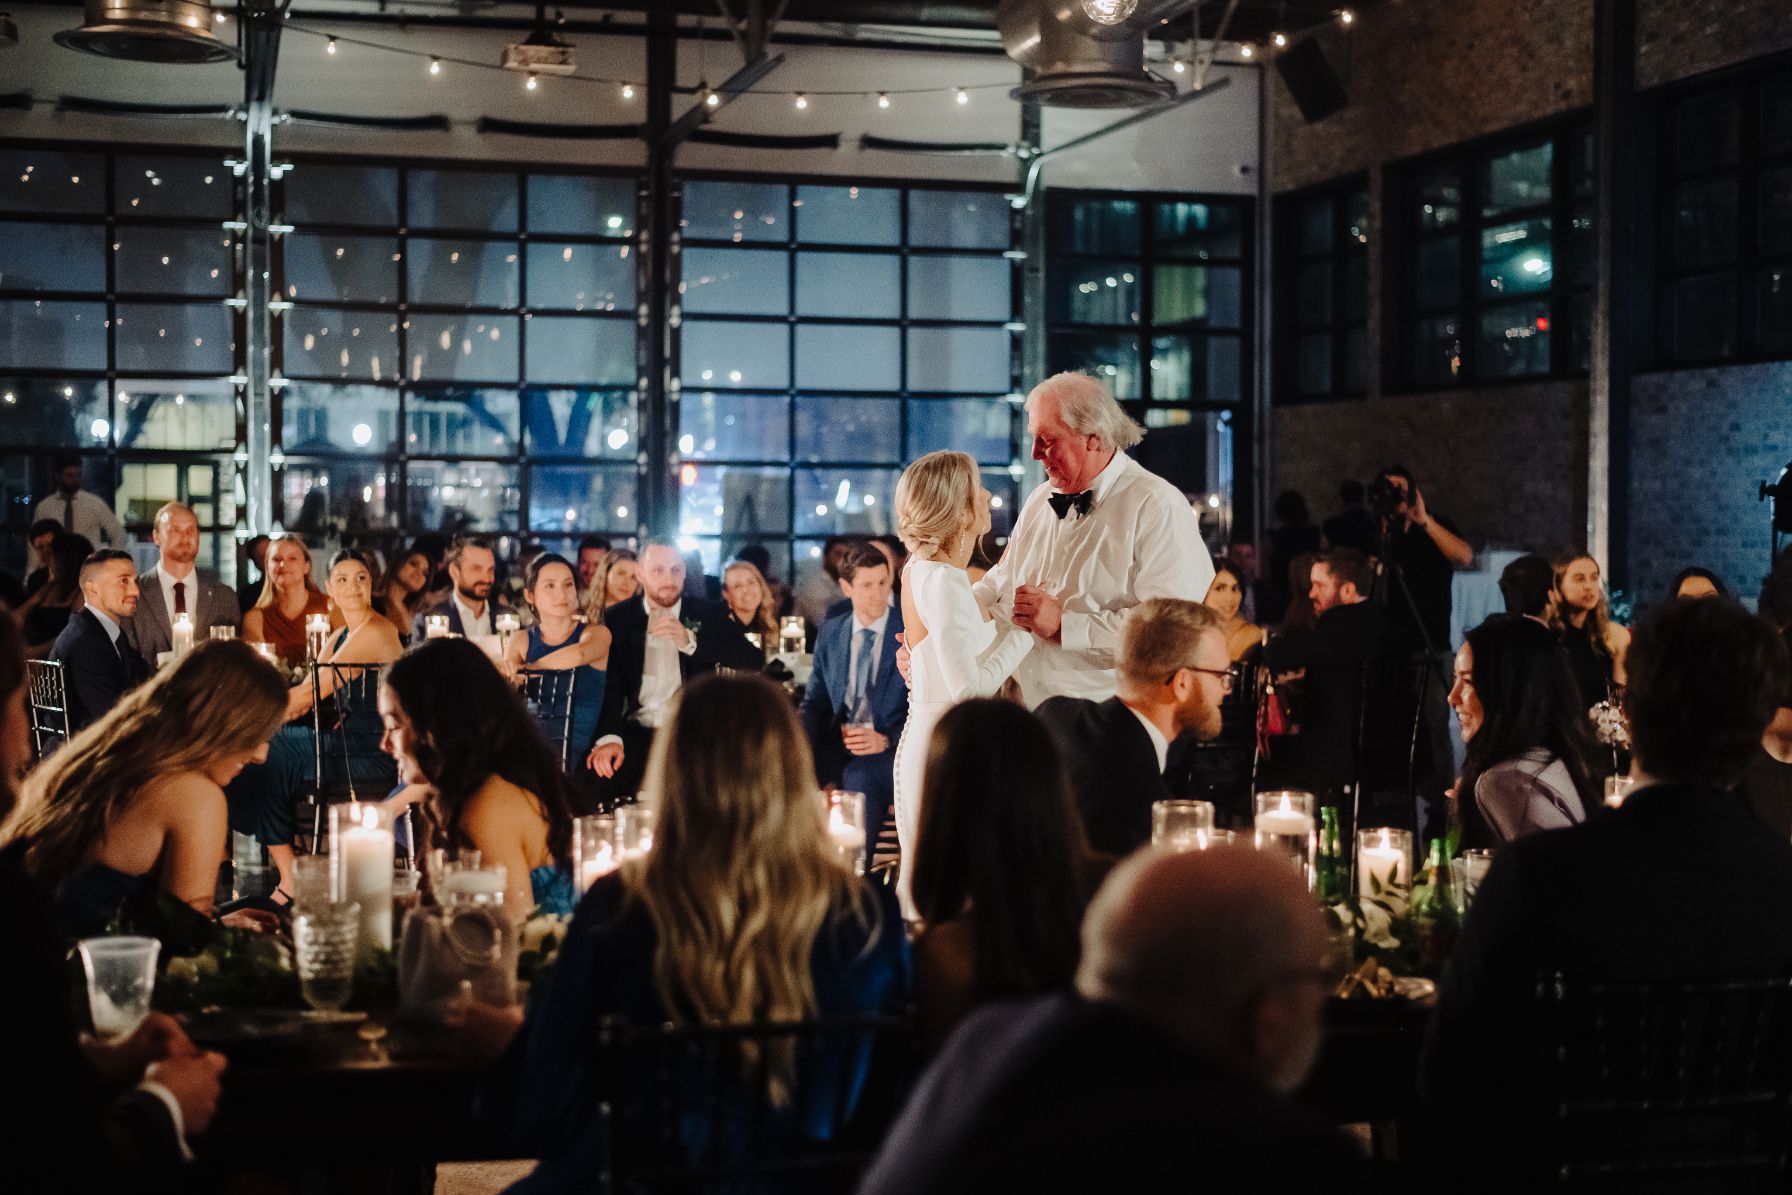 Bride dances with her father during a wedding reception at 800 Congress. The guests are seated at tables and a large wall of glass windows are in the background. 